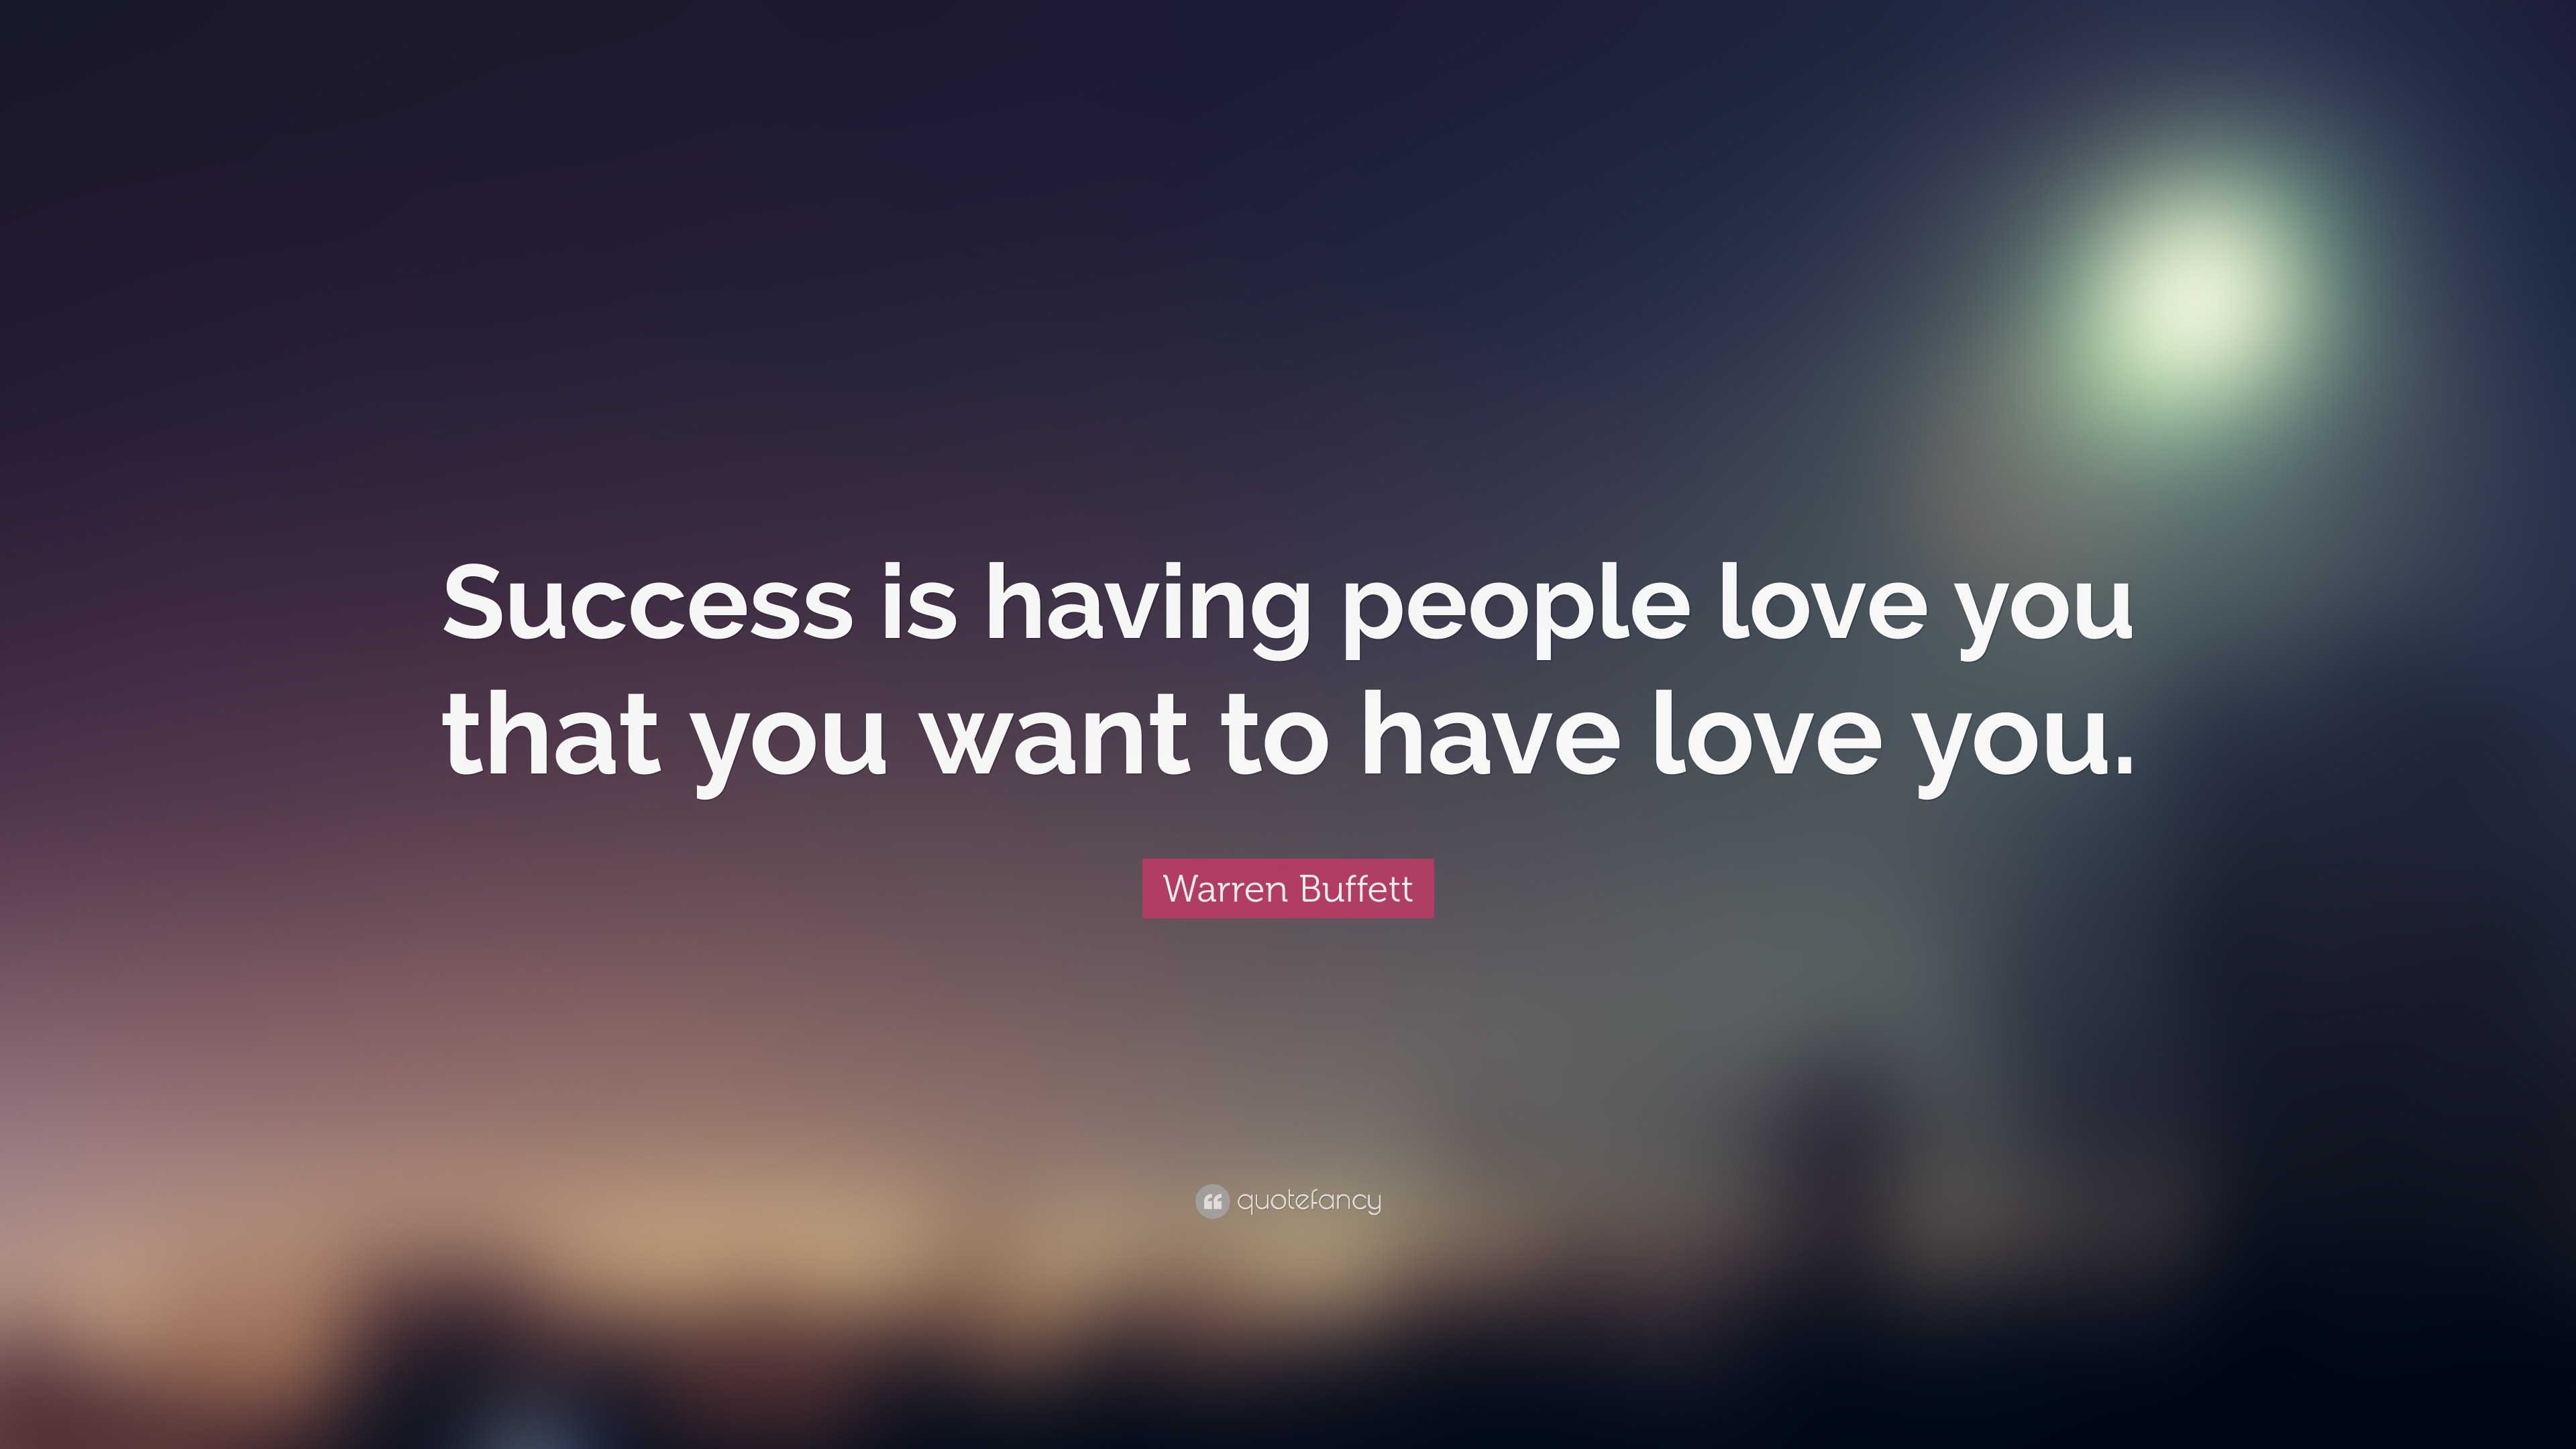 Warren Buffett Quote Success Is Having People Love You That You Want To Have Love You